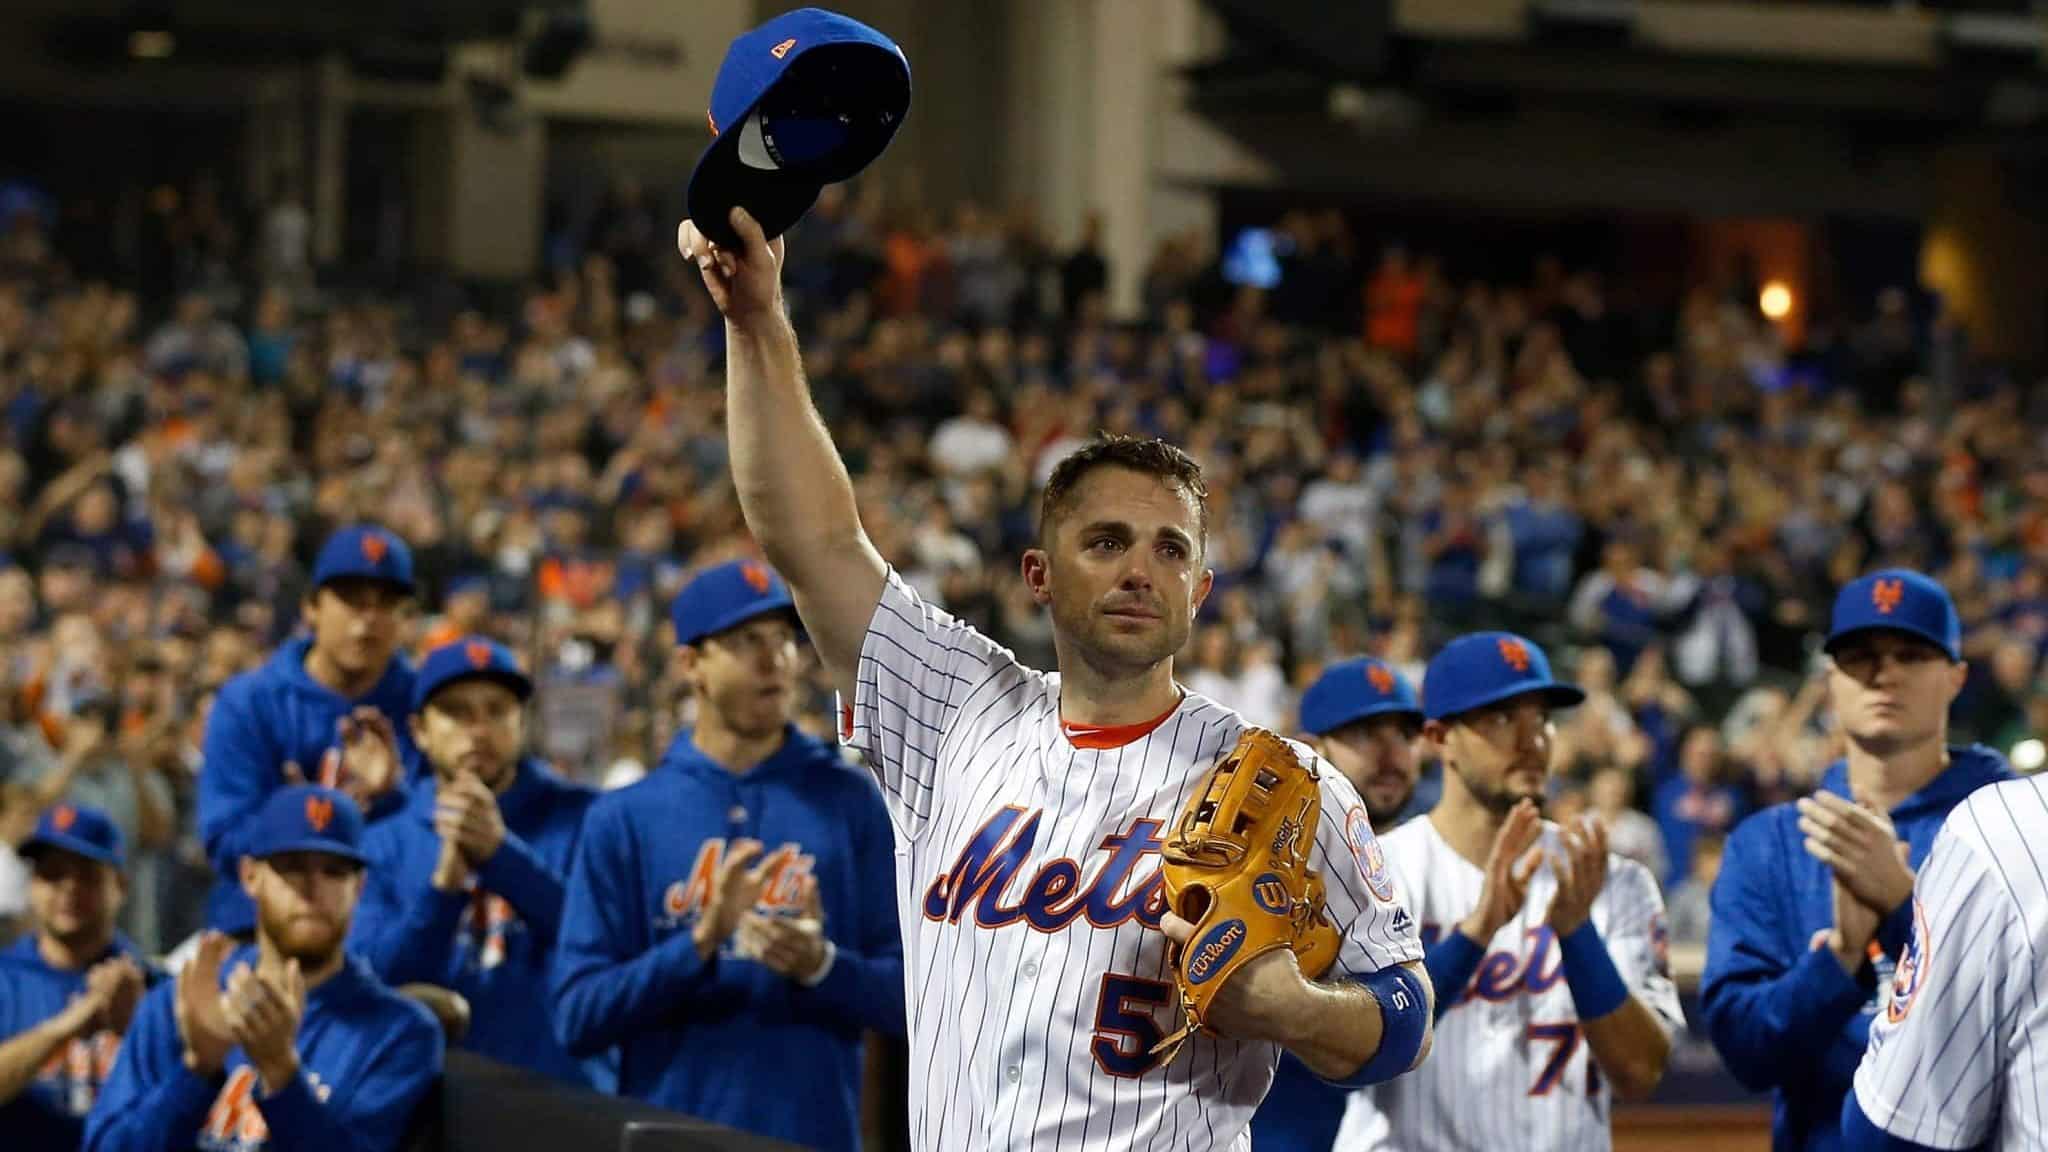 NEW YORK, NY - SEPTEMBER 29: (EDITORS NOTE: Retransmission with alternate crop.) David Wright #5 of the New York Mets acknowledges the crowd as he is removed from the final game of his career during the fifth inning against the Miami Marlins at Citi Field on September 29, 2018 in the Flushing neighborhood of the Queens borough of New York City.